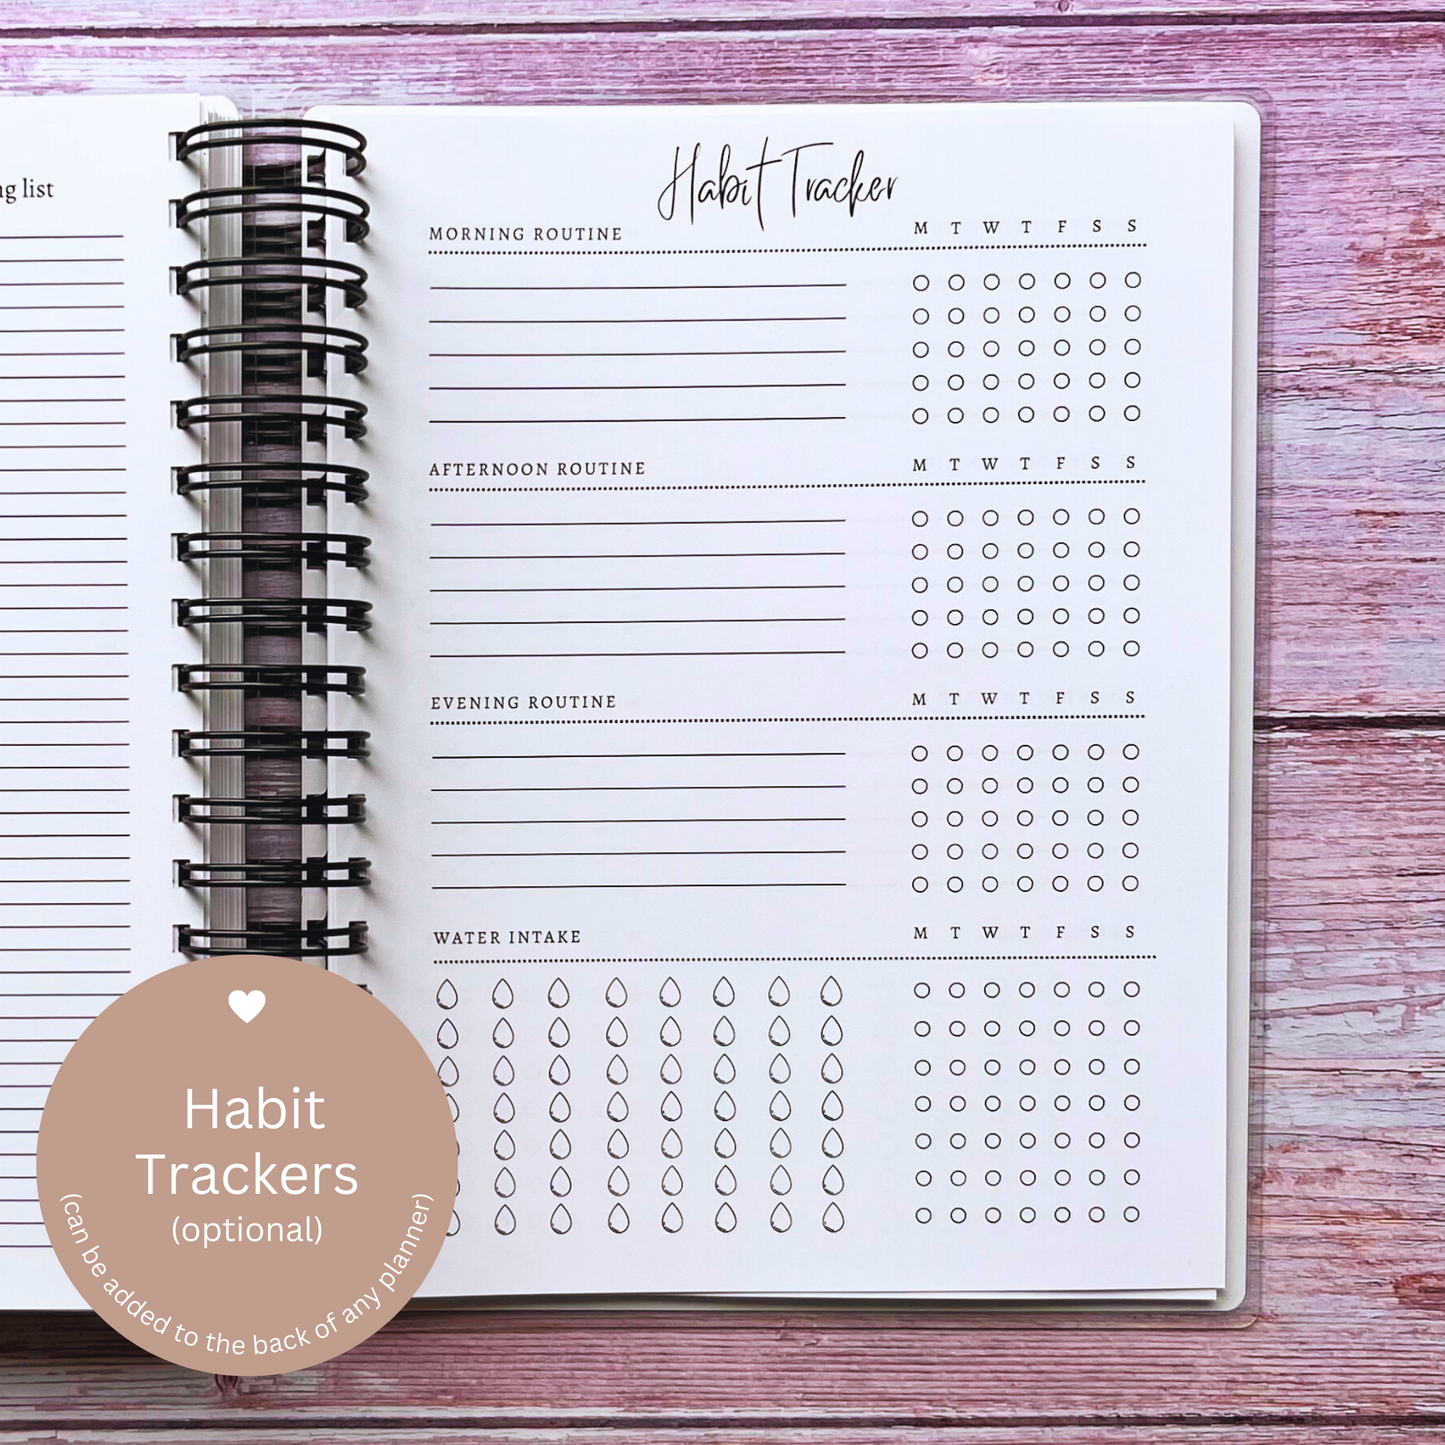 Cat Love Personalized Planner